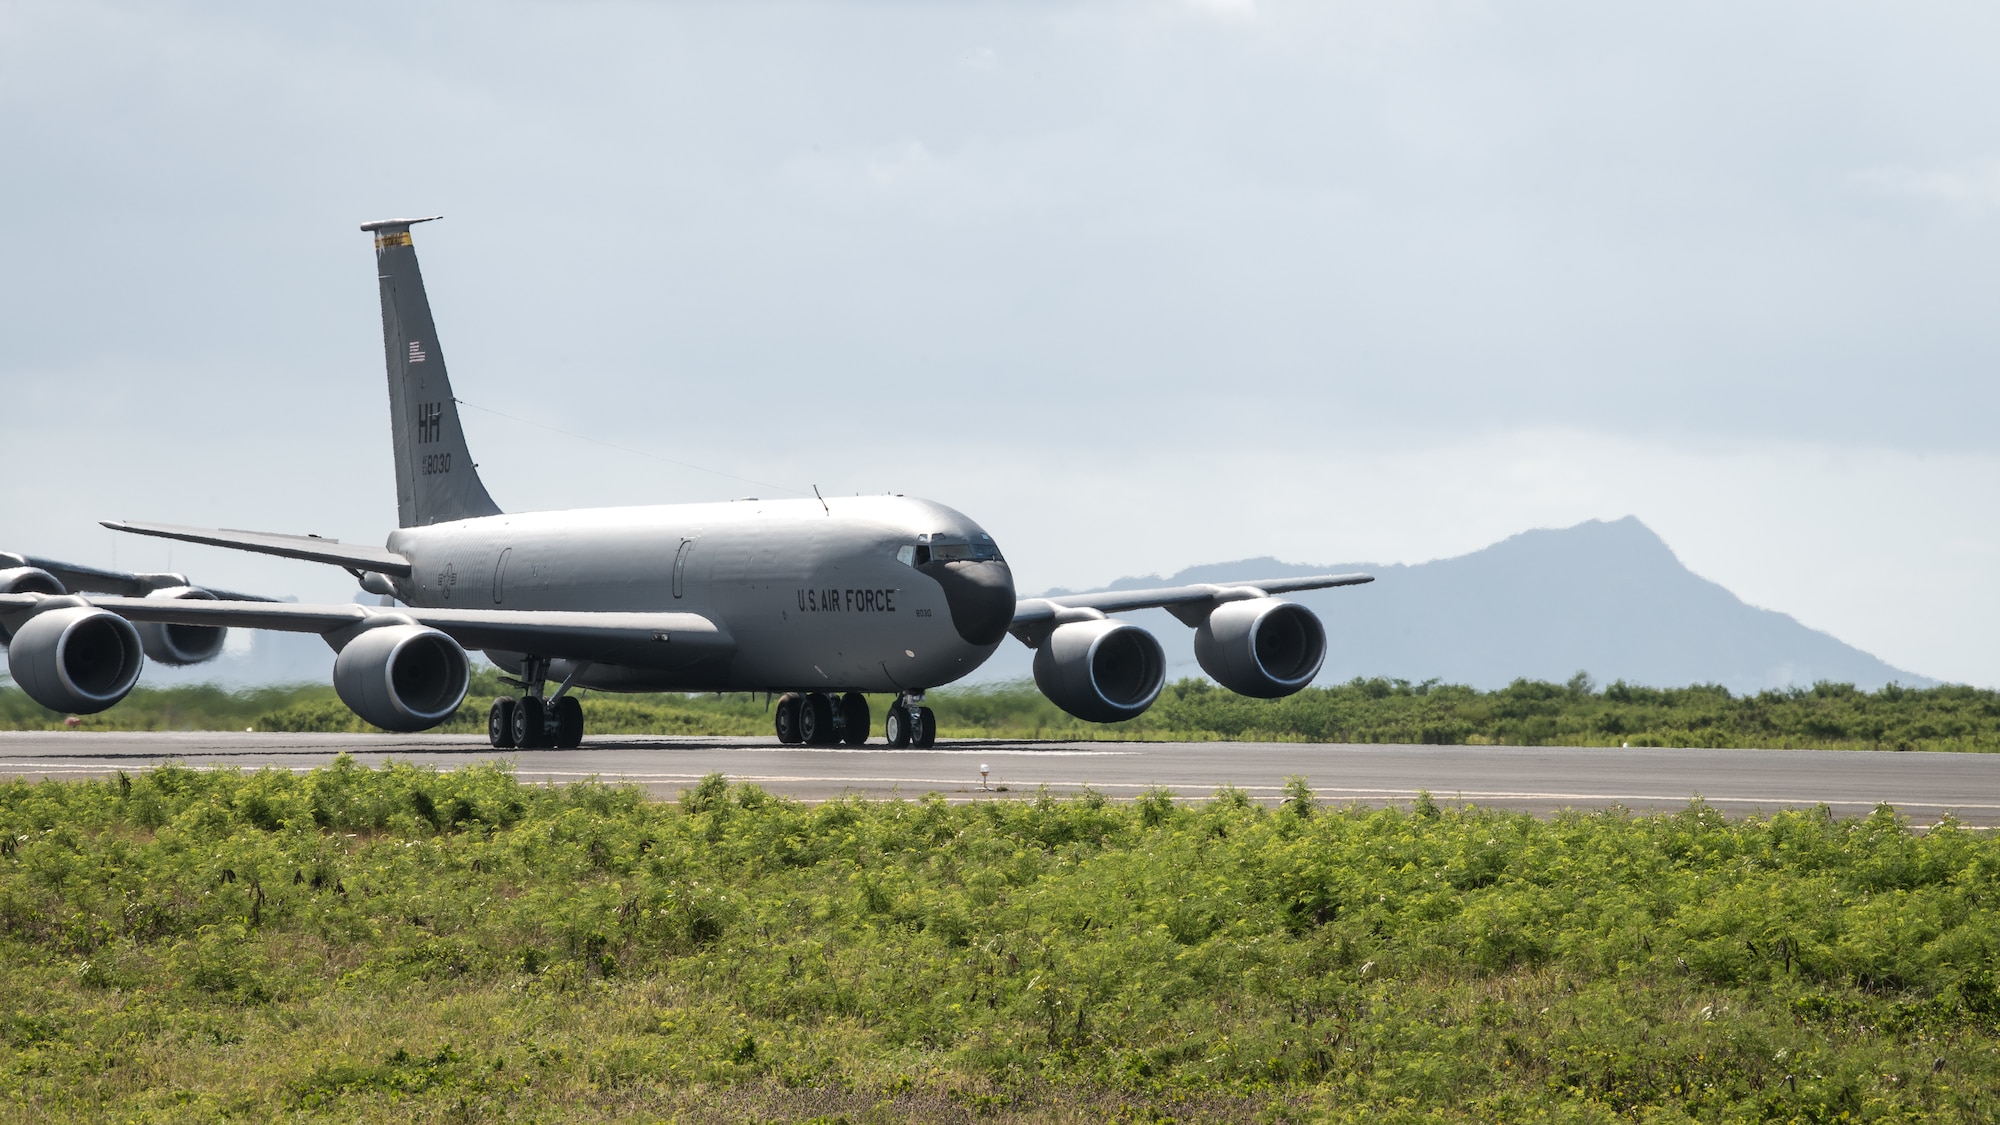 A U.S. Air Force KC-135 Stratotanker taxis on the runway during a routine training schedule April 21, 2020, at Honolulu International Airport, Hawaii. Given the low traffic at the airport due to COVID-19 mitigation efforts, the active-duty 15th Wing and the Hawaii Air National Guard’s 154th Wing seized
an opportunity to document the operation which showcases readiness and their unique Total Force Integration construct. The units of Team Hickam work together seamlessly to deliver combat airpower, tanker fuel, and humanitarian support and disaster relief across the Indo-Pacific. (U.S. Air
National Guard photo by Senior Airman John Linzmeier)